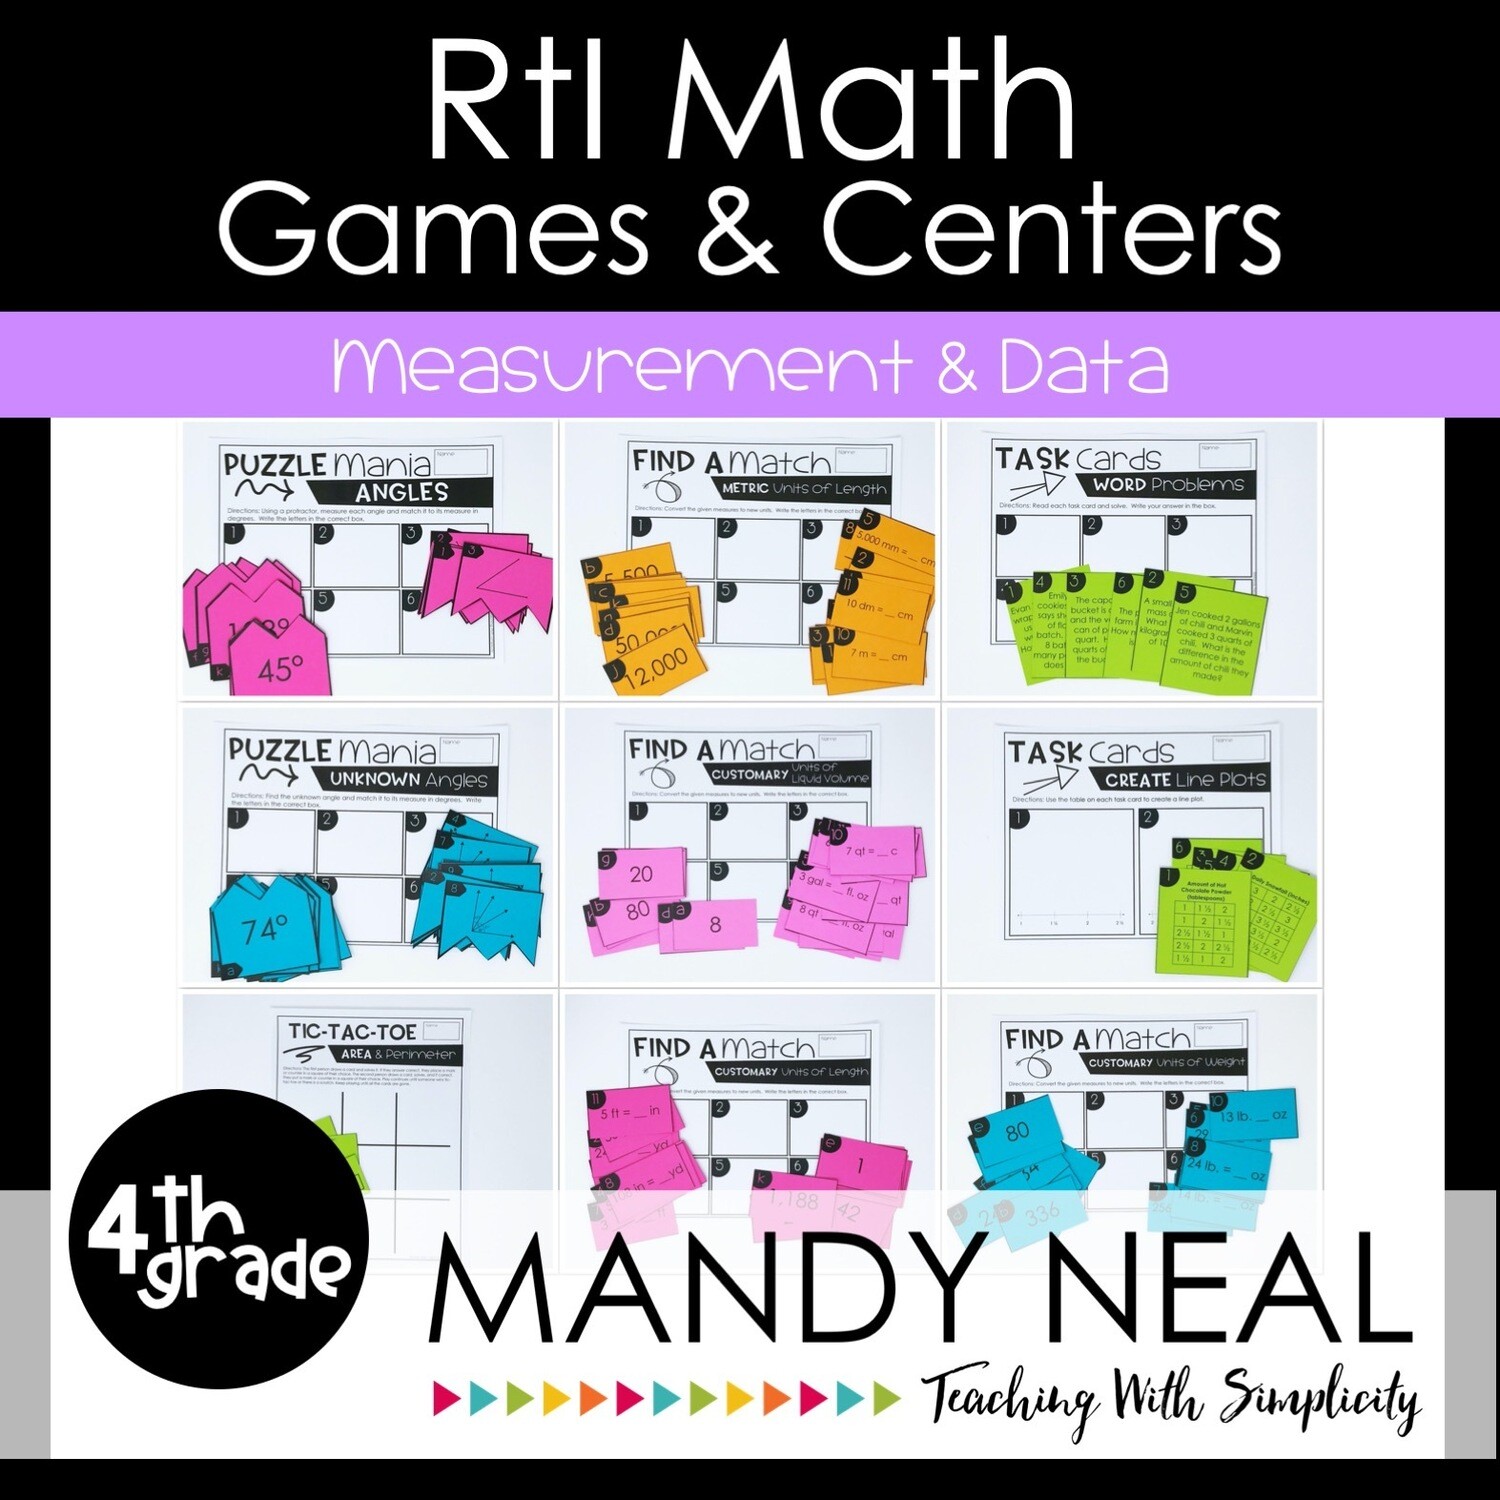 4th Grade Math Intervention Games and Centers for Measurement & Data